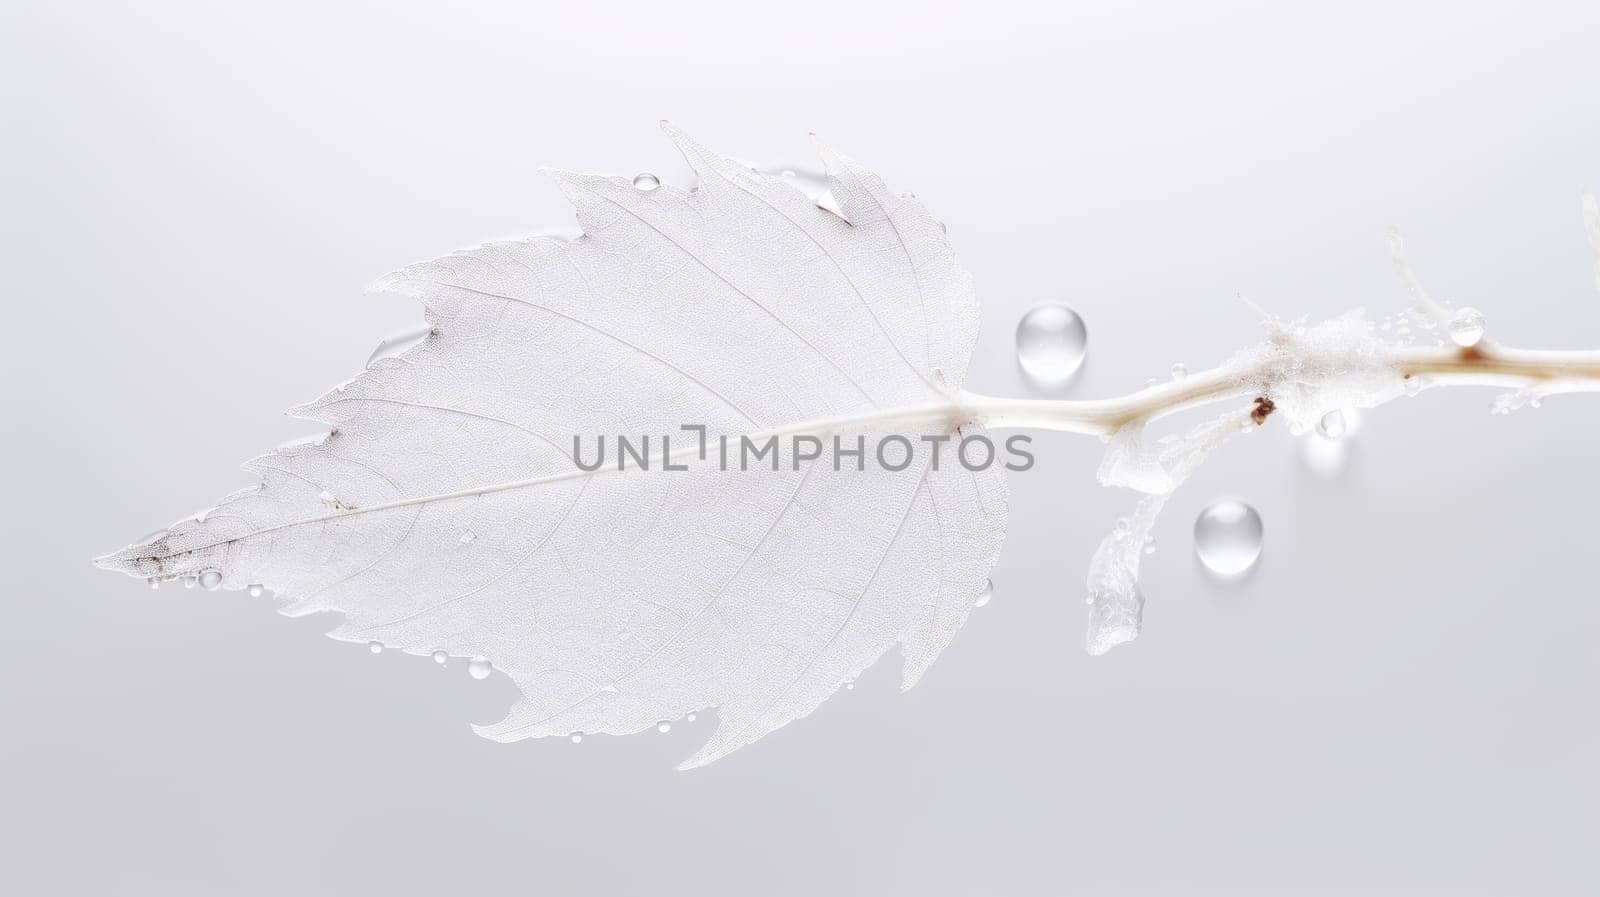 white leaf with water droplets on a white background. This image captures the beauty and fragility of nature. The leaf is translucent and has some red spots, adding contrast and interest. High quality photo